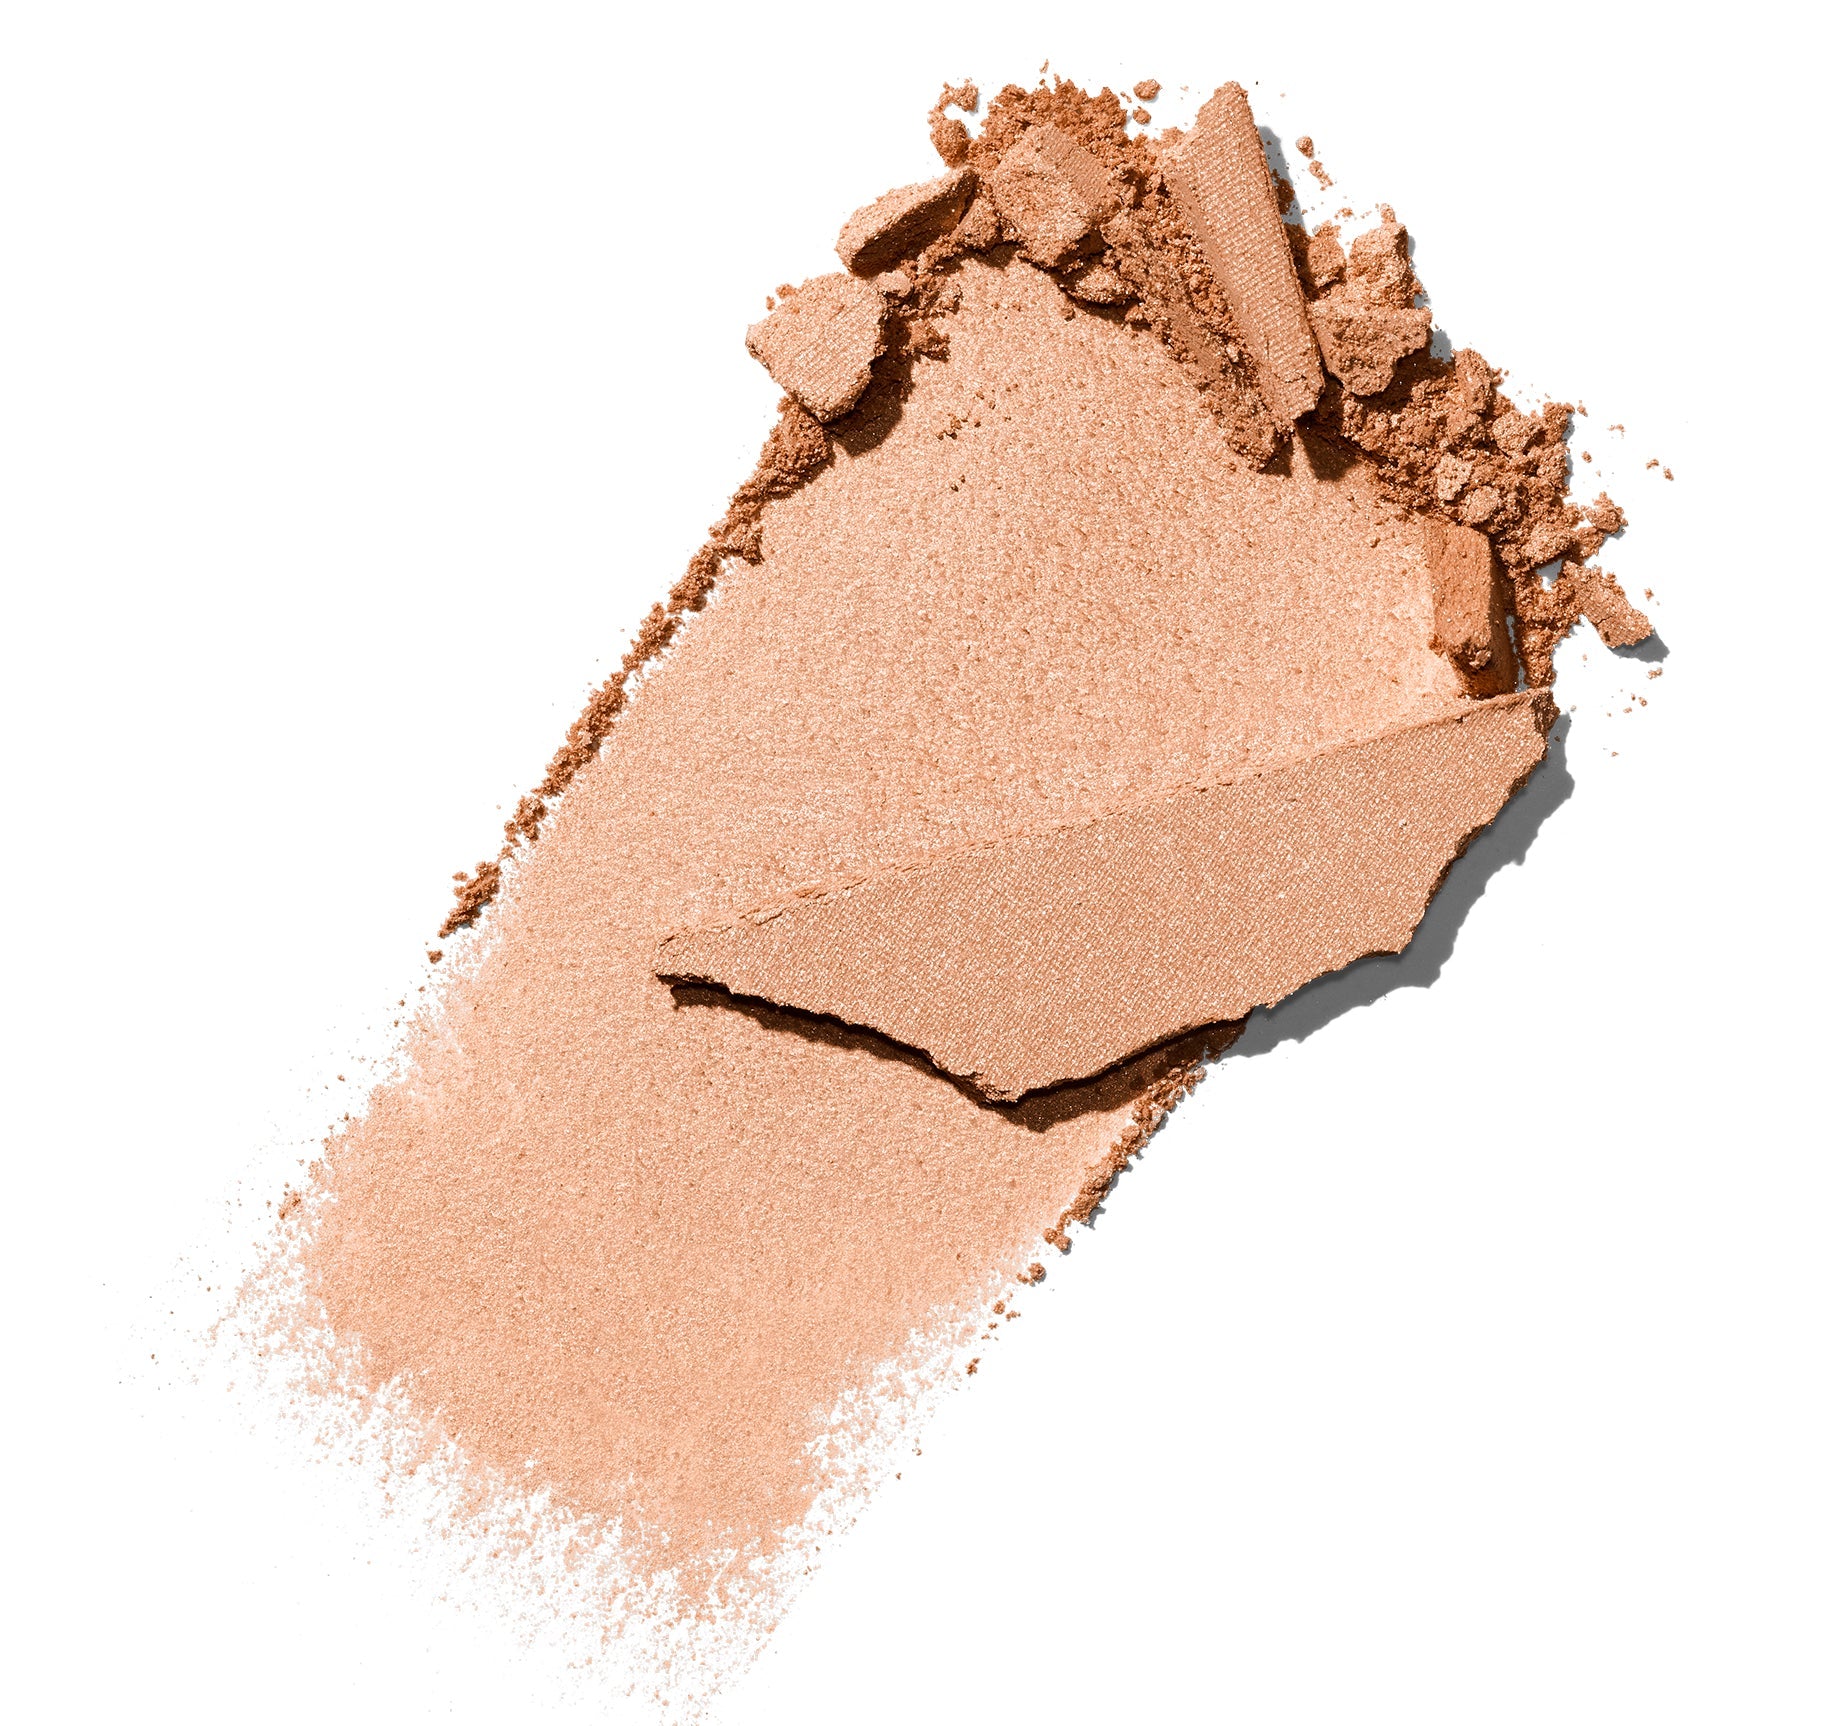 Glow Show Radiant Pressed Highlighter